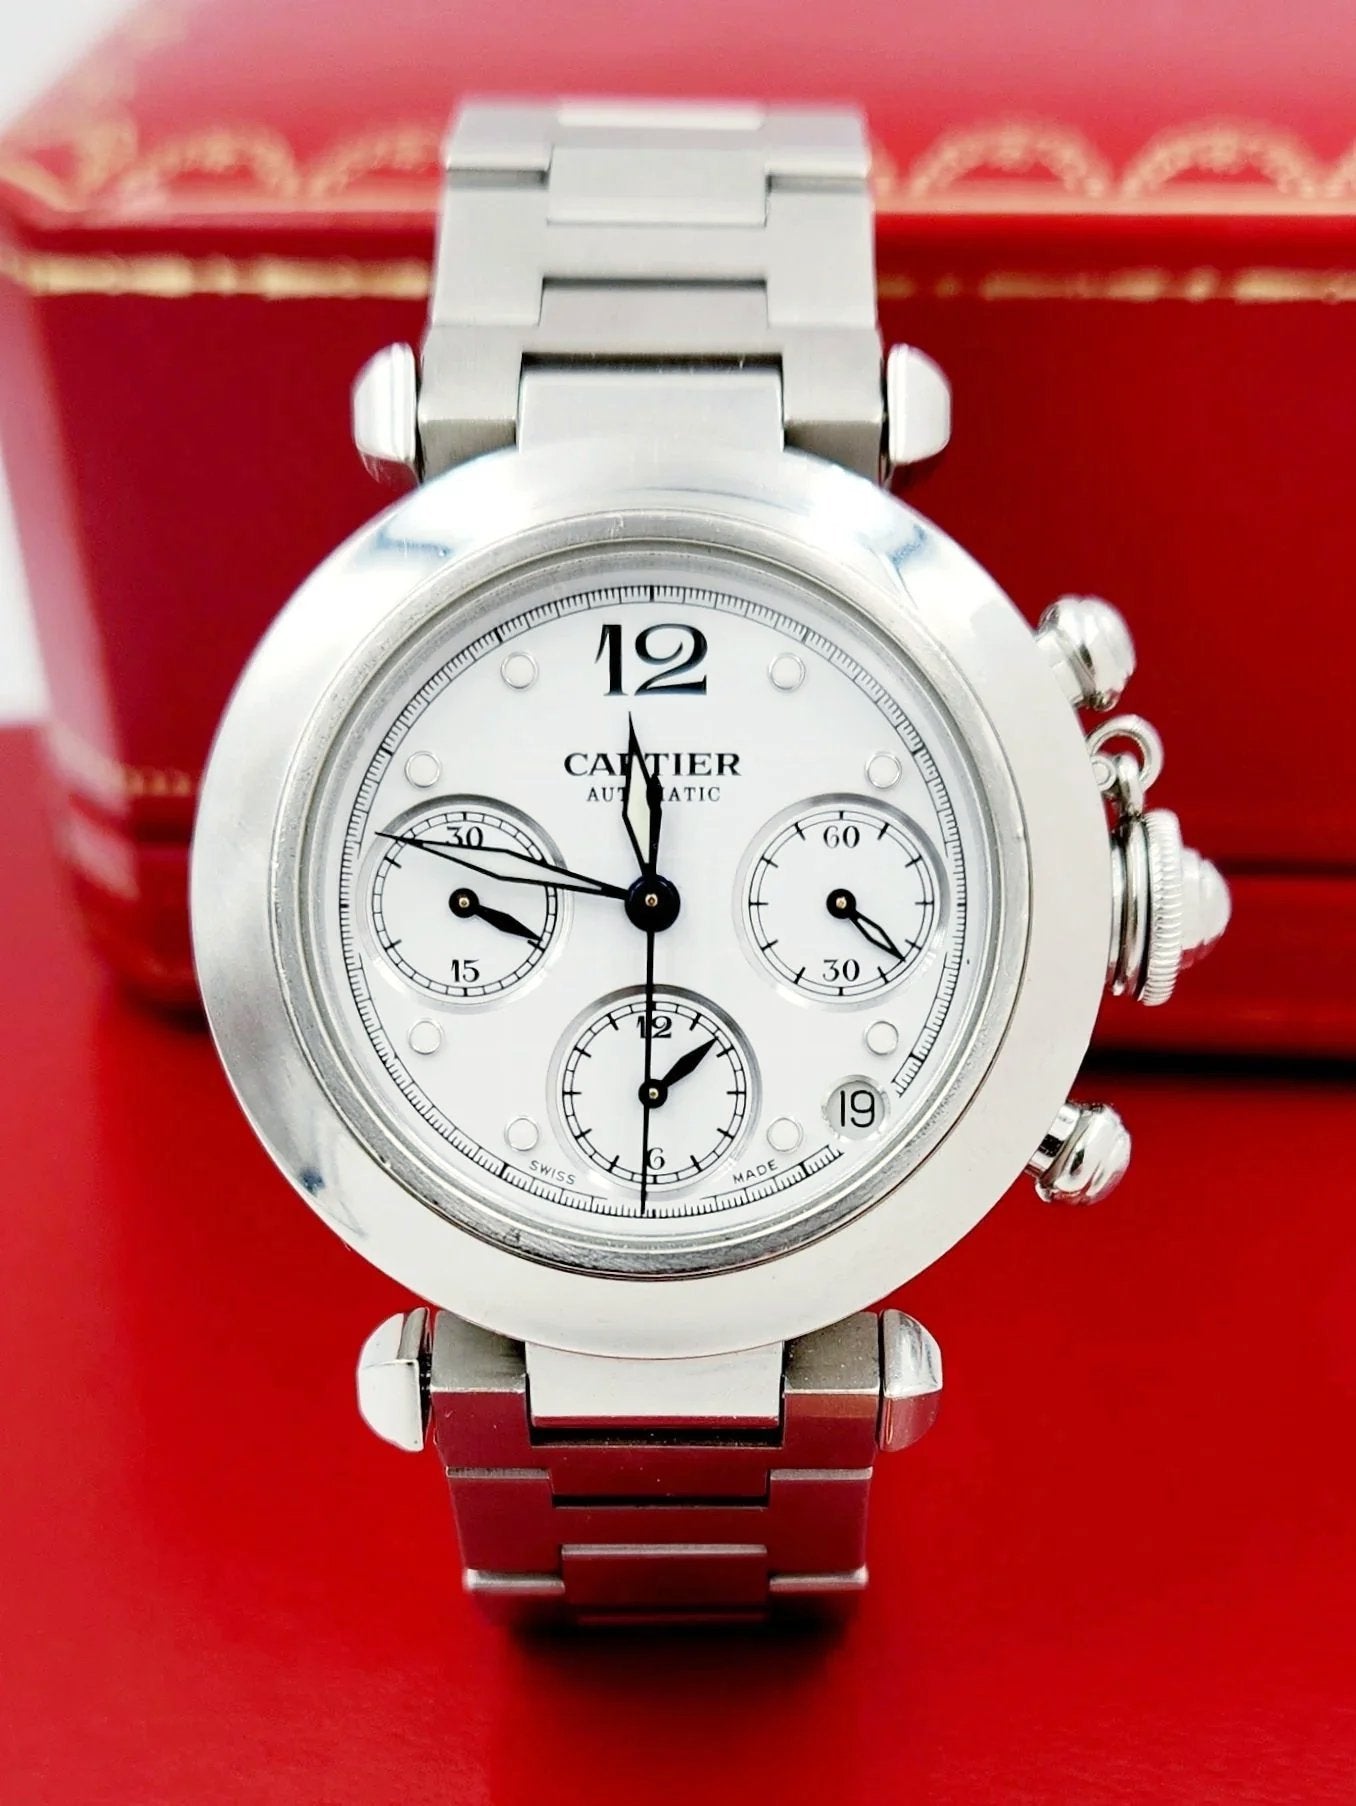 Unisex Medium 36mm Cartier Pasha Chronograph Automatic Watch with White Dial in Matte Stainless Steel. (Pre-Owned 2412)